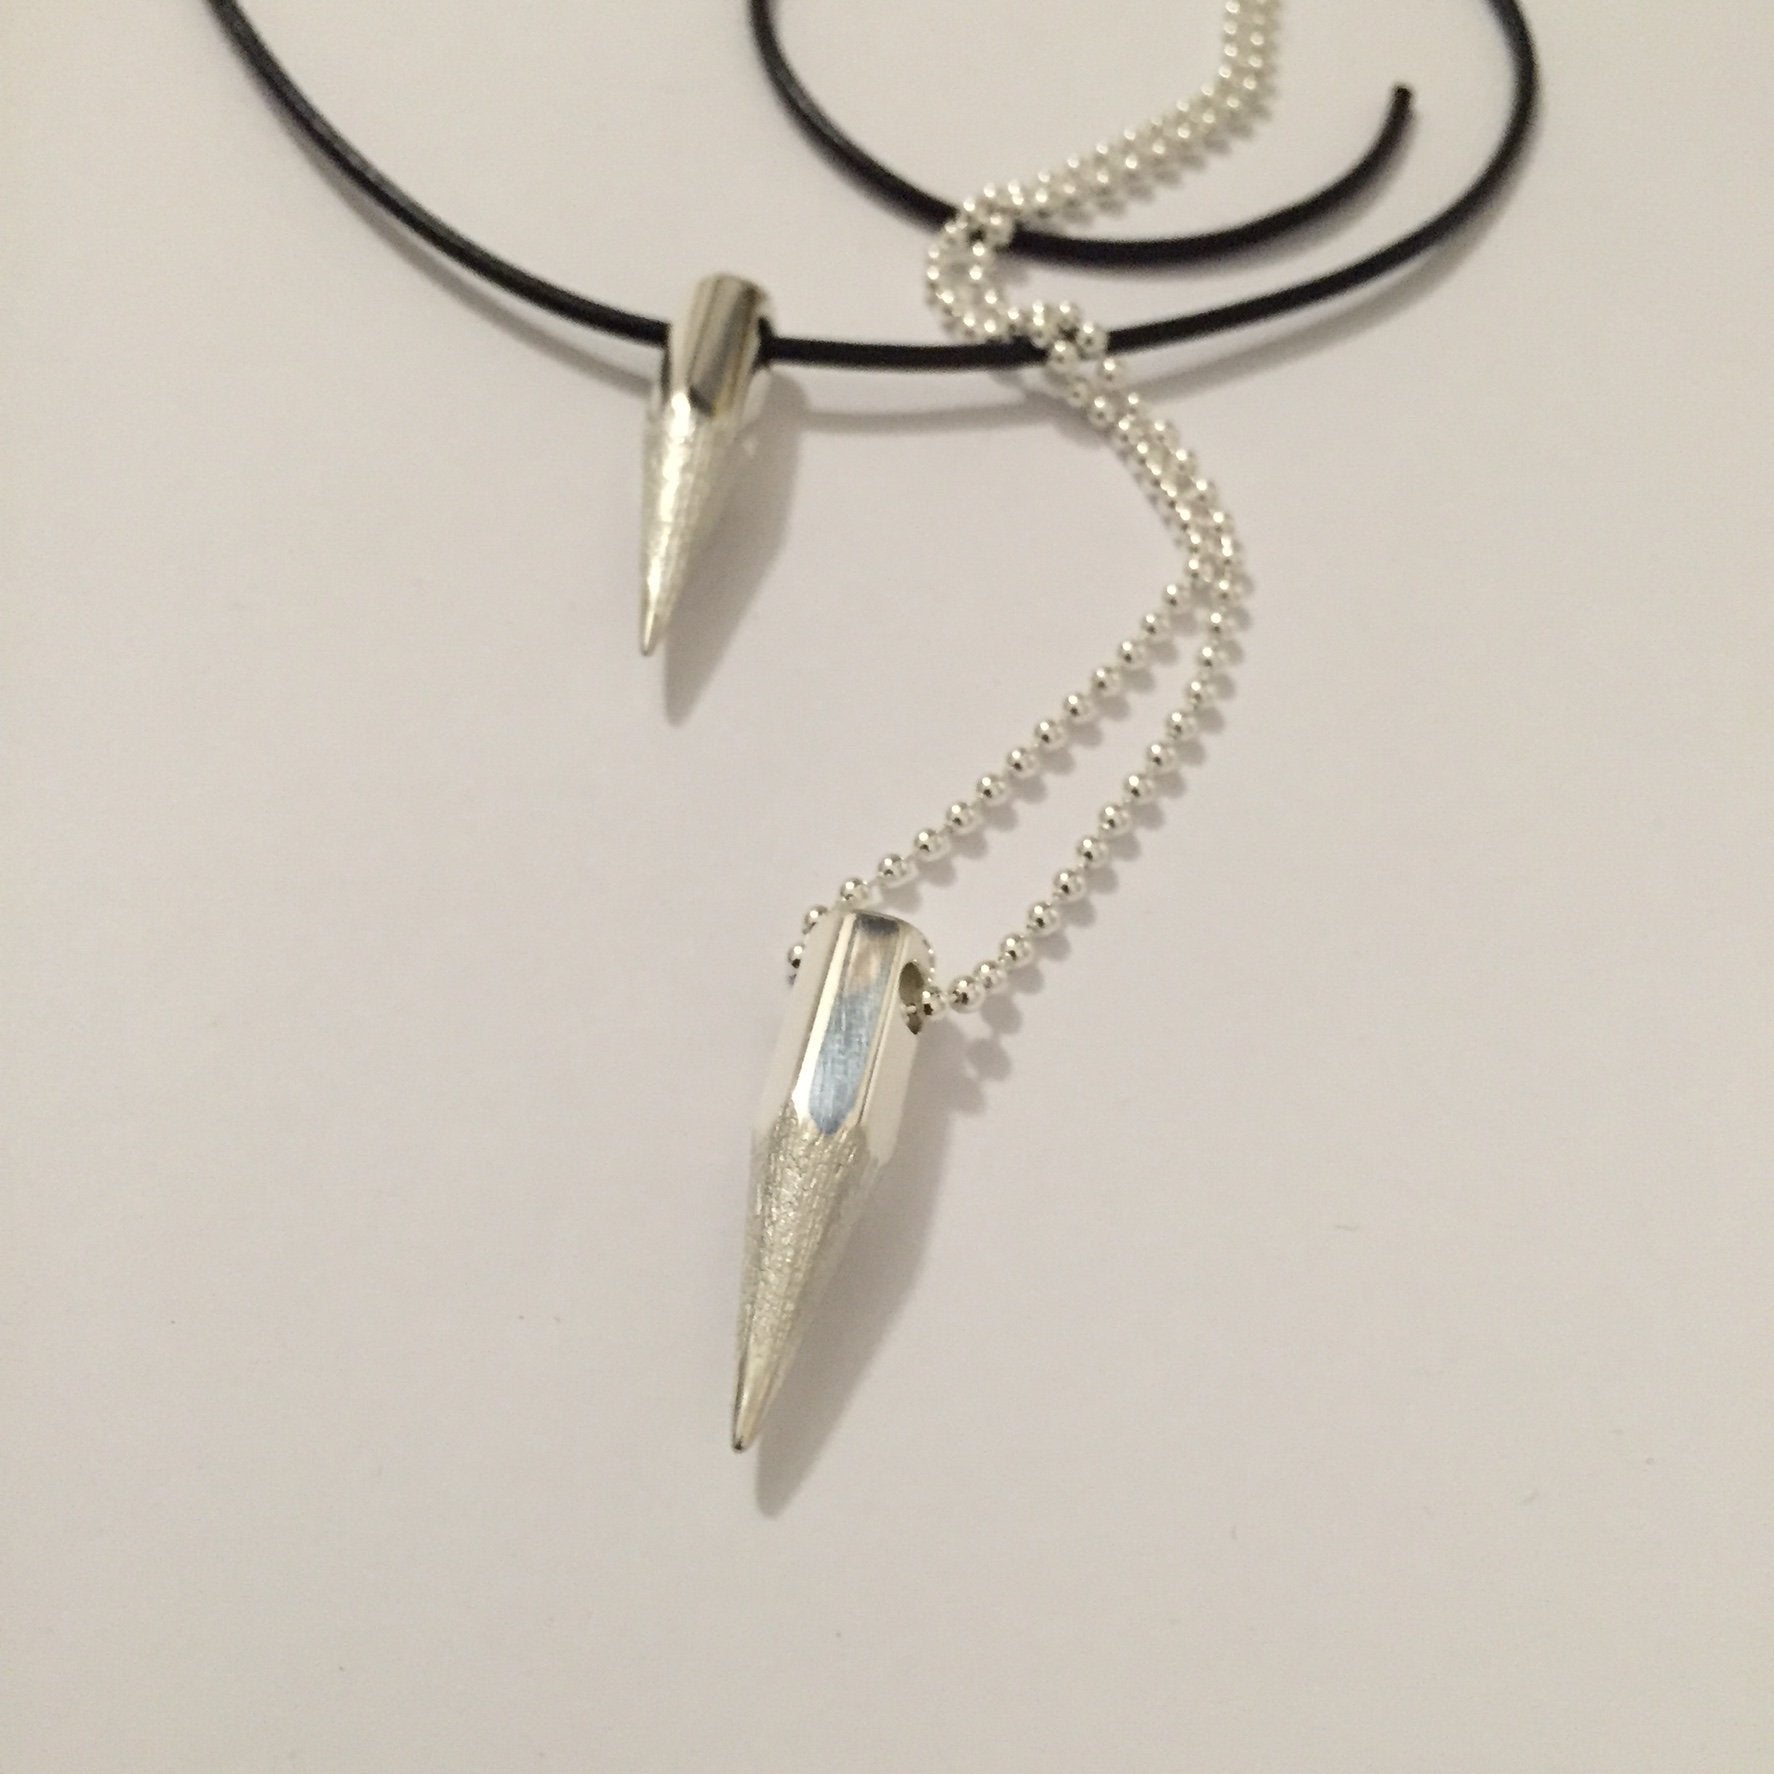 Sharp Words Pendant on a silver chain